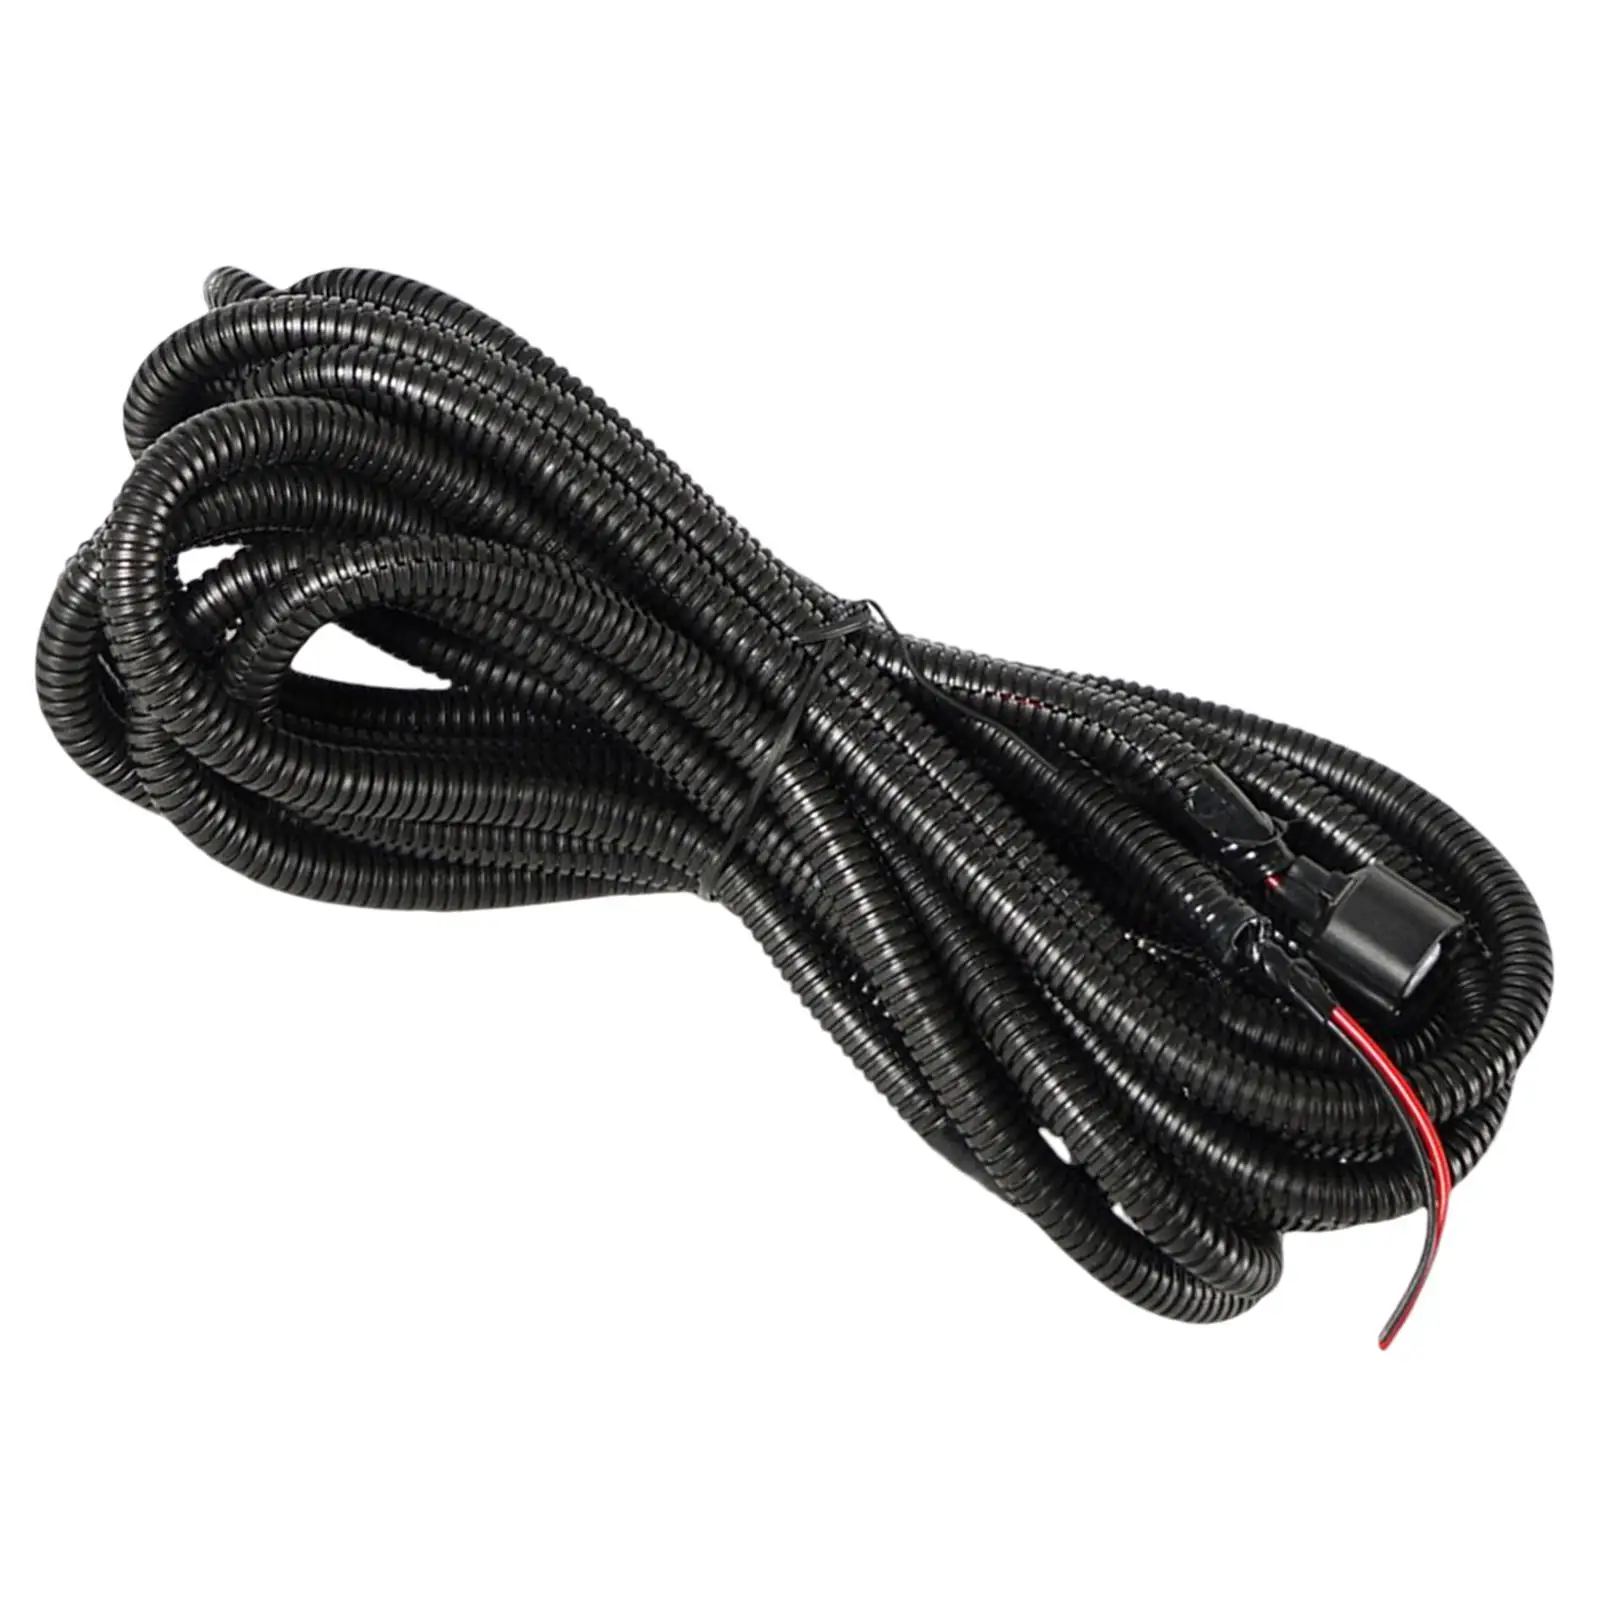 Electric Locker Wire Harness P5155359 Insulating Surface 12V Fit for Jeep Wrangler JK Jku 44 20ft Long Connect Harness